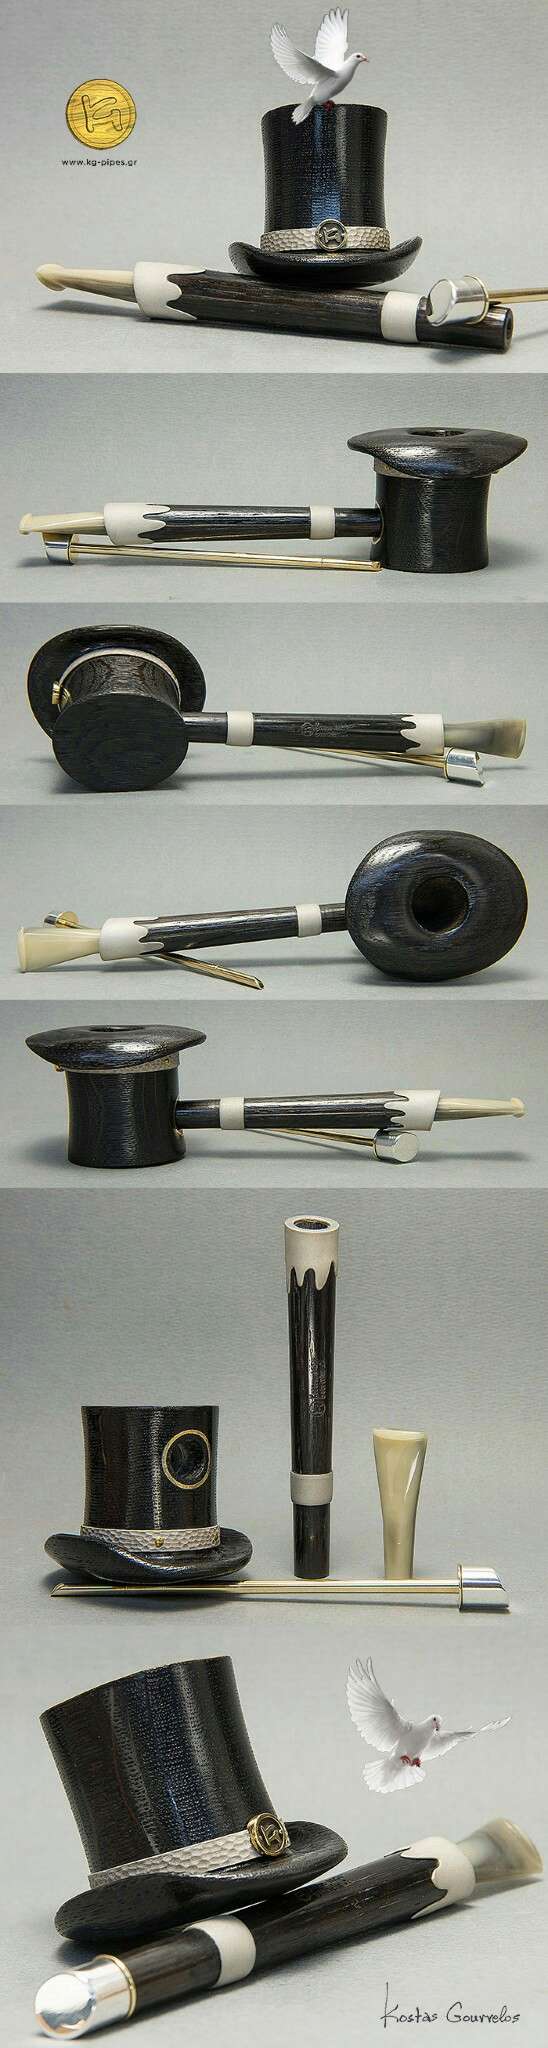 Les pipes bizarres...  - Page 52 67ad6b10